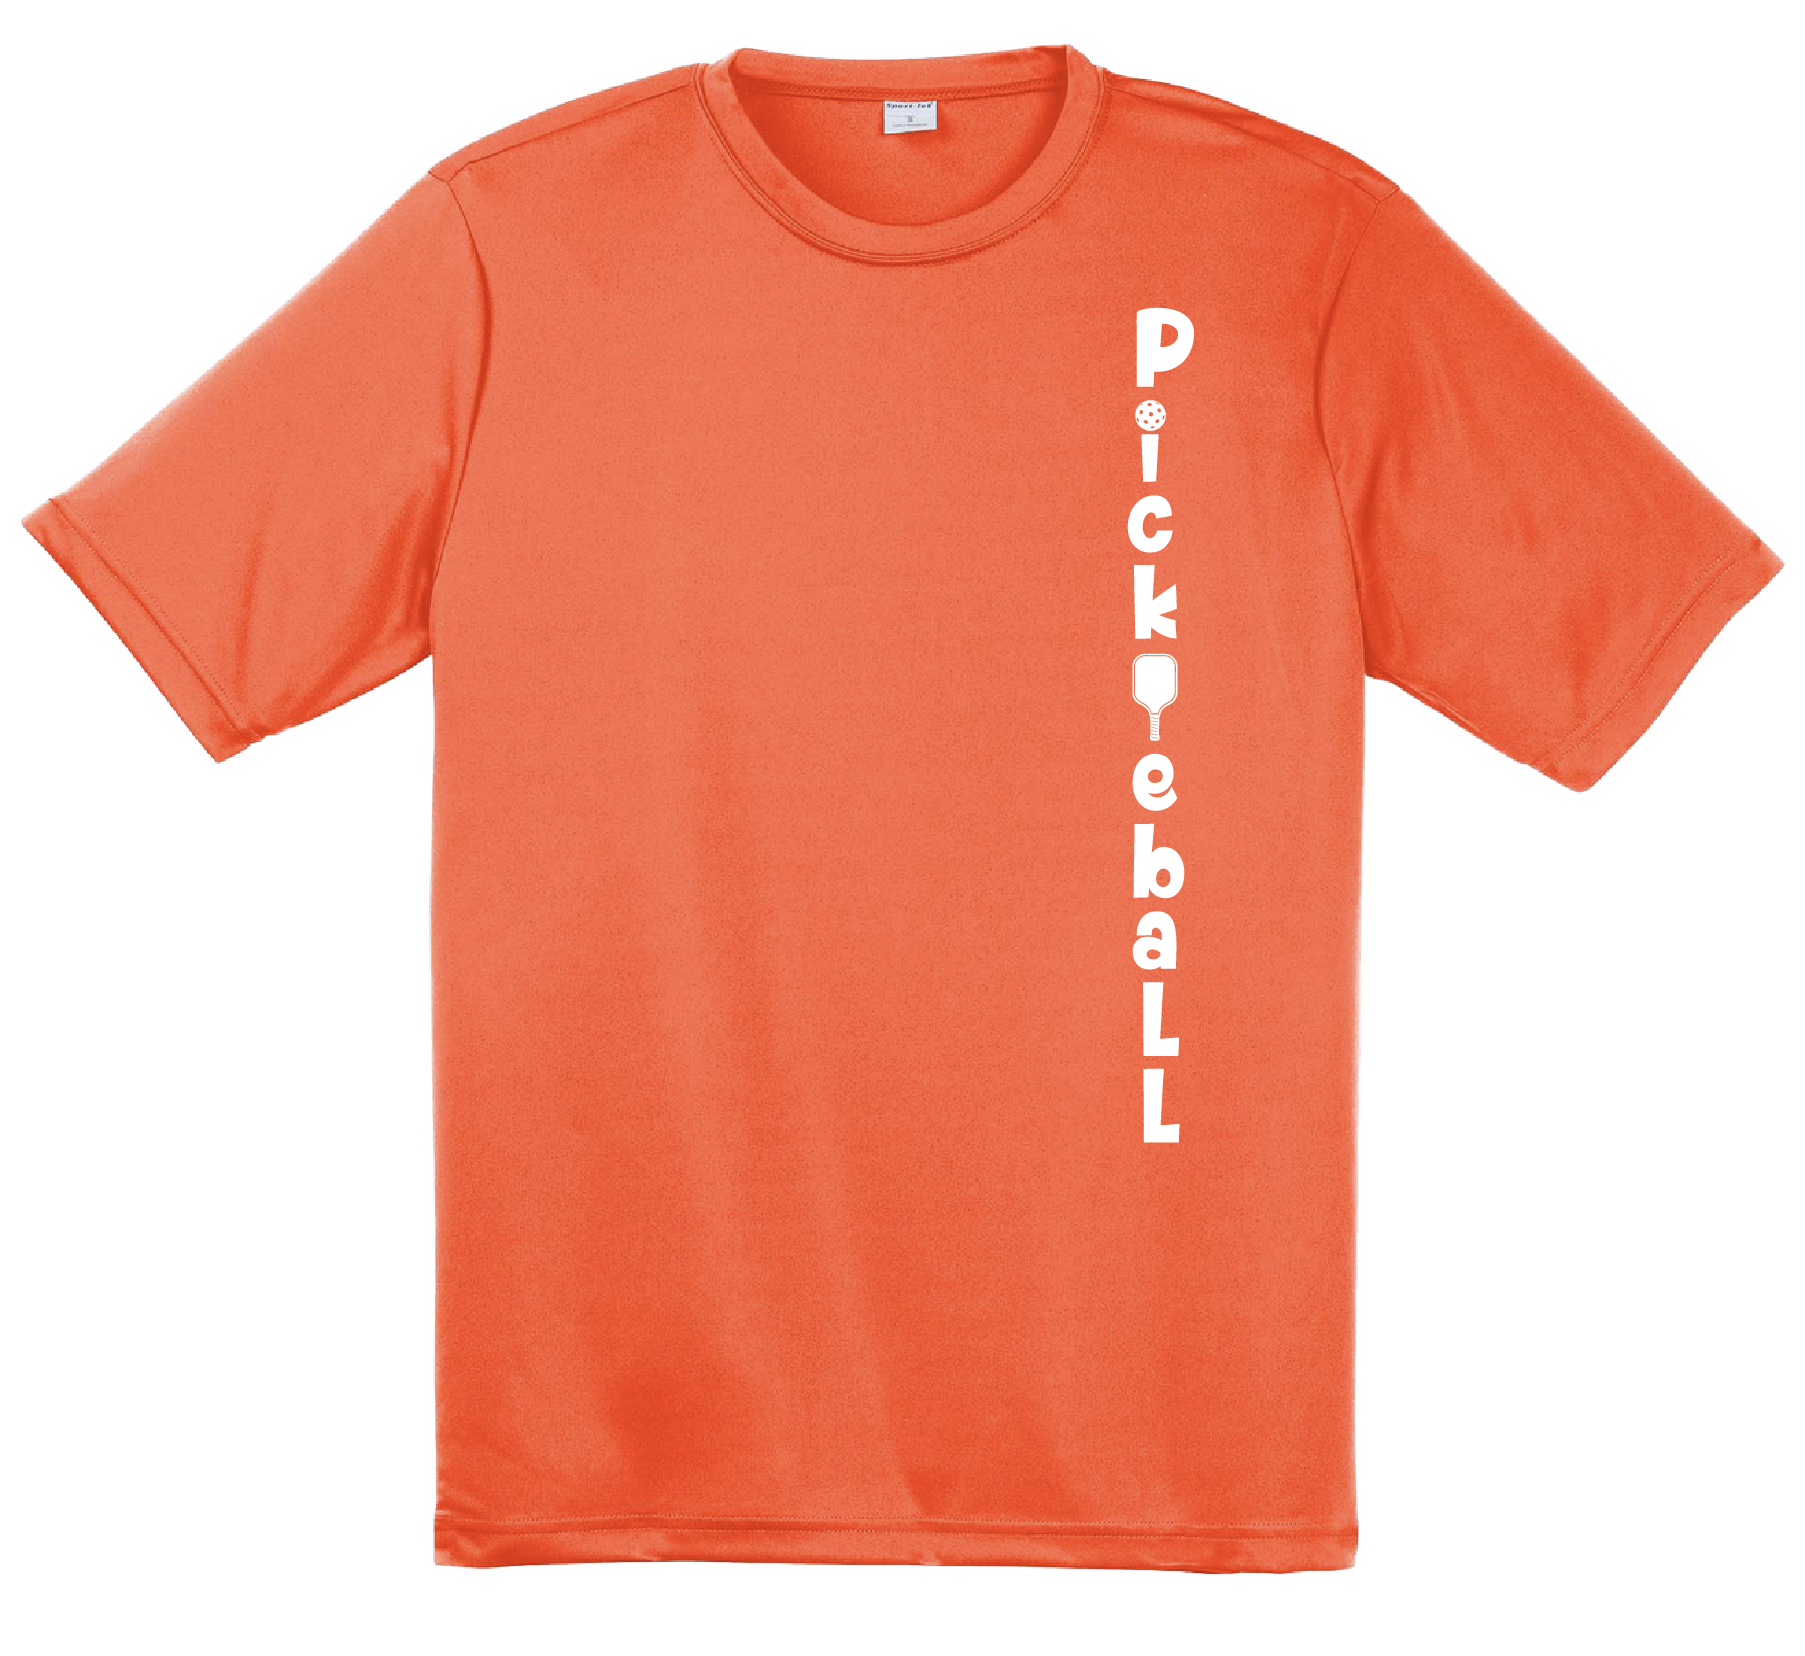 Pickleball Design: Pickleball Vertical Customizable Location  Men's Styles: Short Sleeve (SS)  Shirts are lightweight, roomy and highly breathable. These moisture-wicking shirts are designed for athletic performance. They feature PosiCharge technology to lock in color and prevent logos from fading. Removable tag and set-in sleeves for comfort.